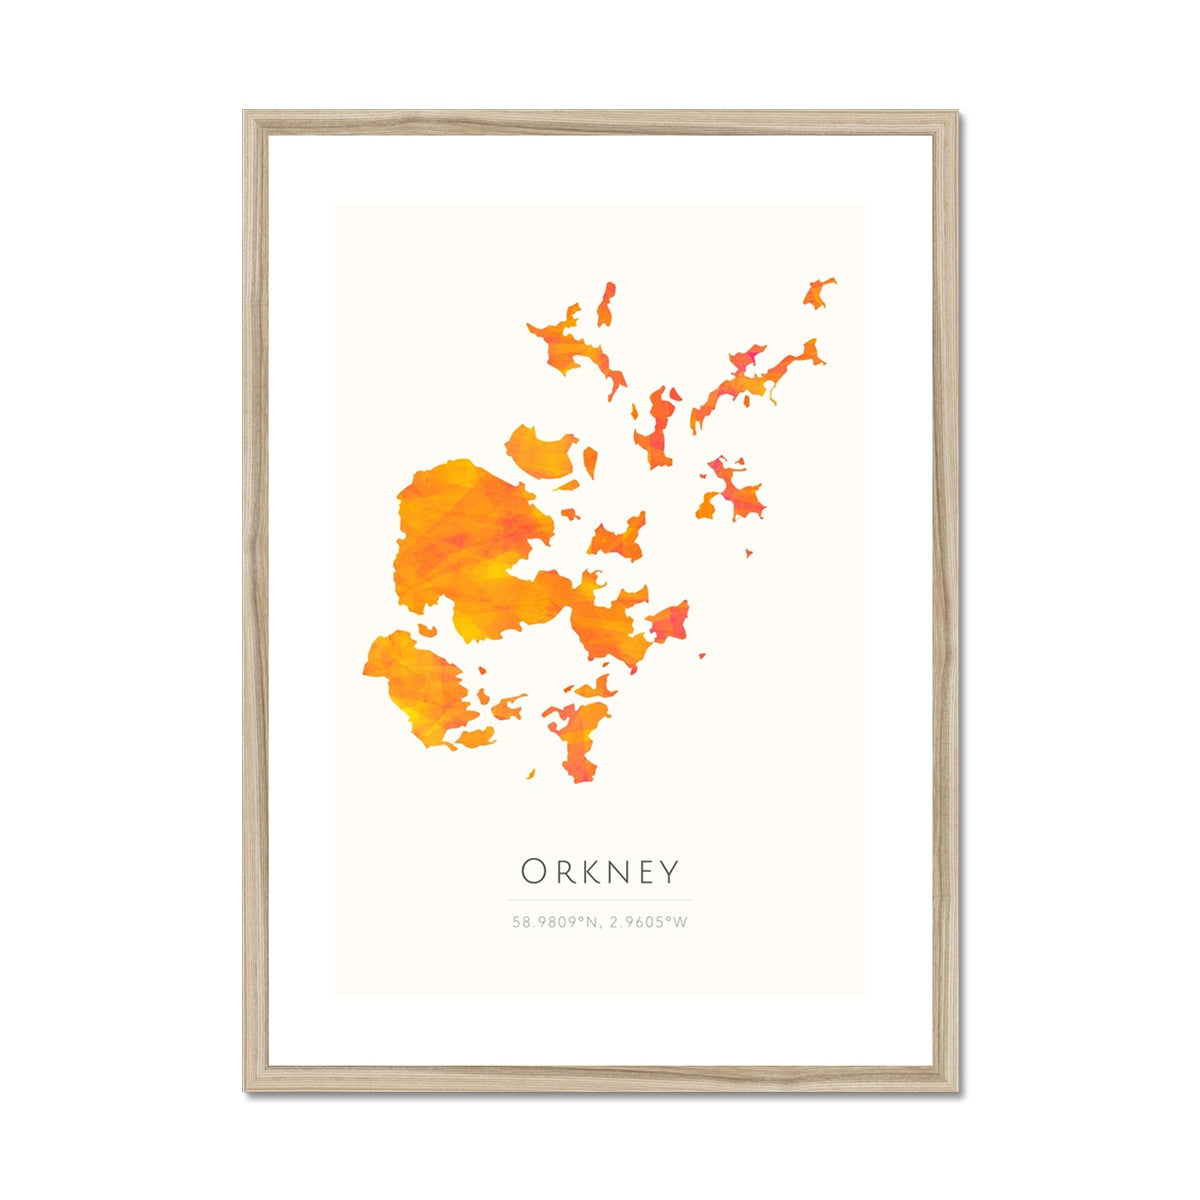 Custom Map for Ruth - Orkney Framed & Mounted Print